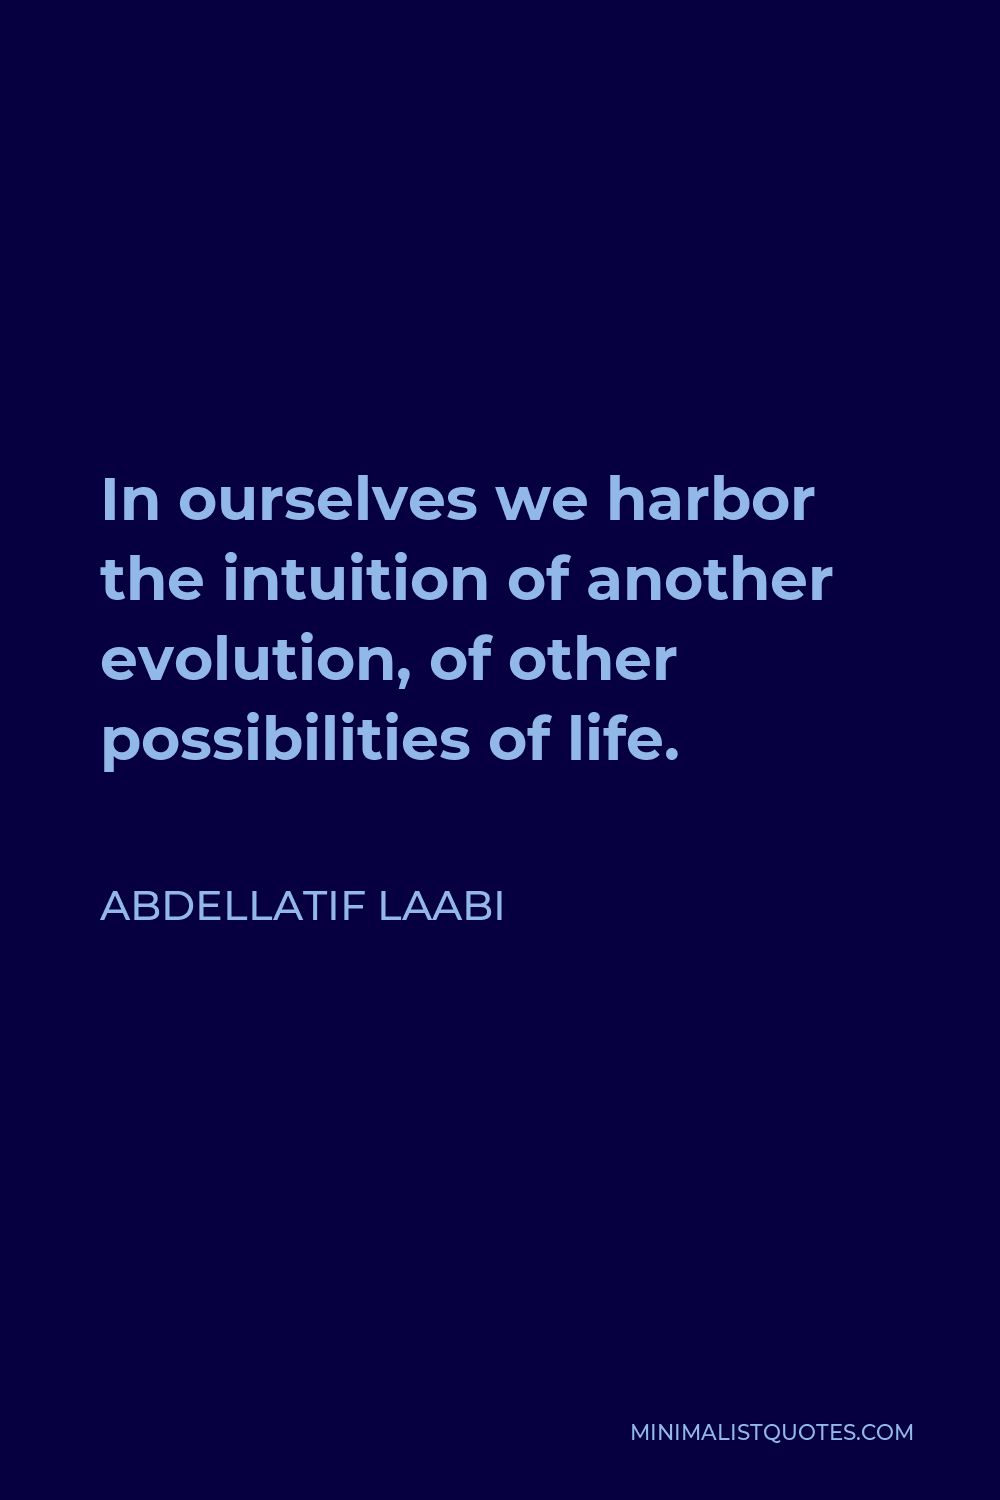 Abdellatif Laabi Quote - In ourselves we harbor the intuition of another evolution, of other possibilities of life.